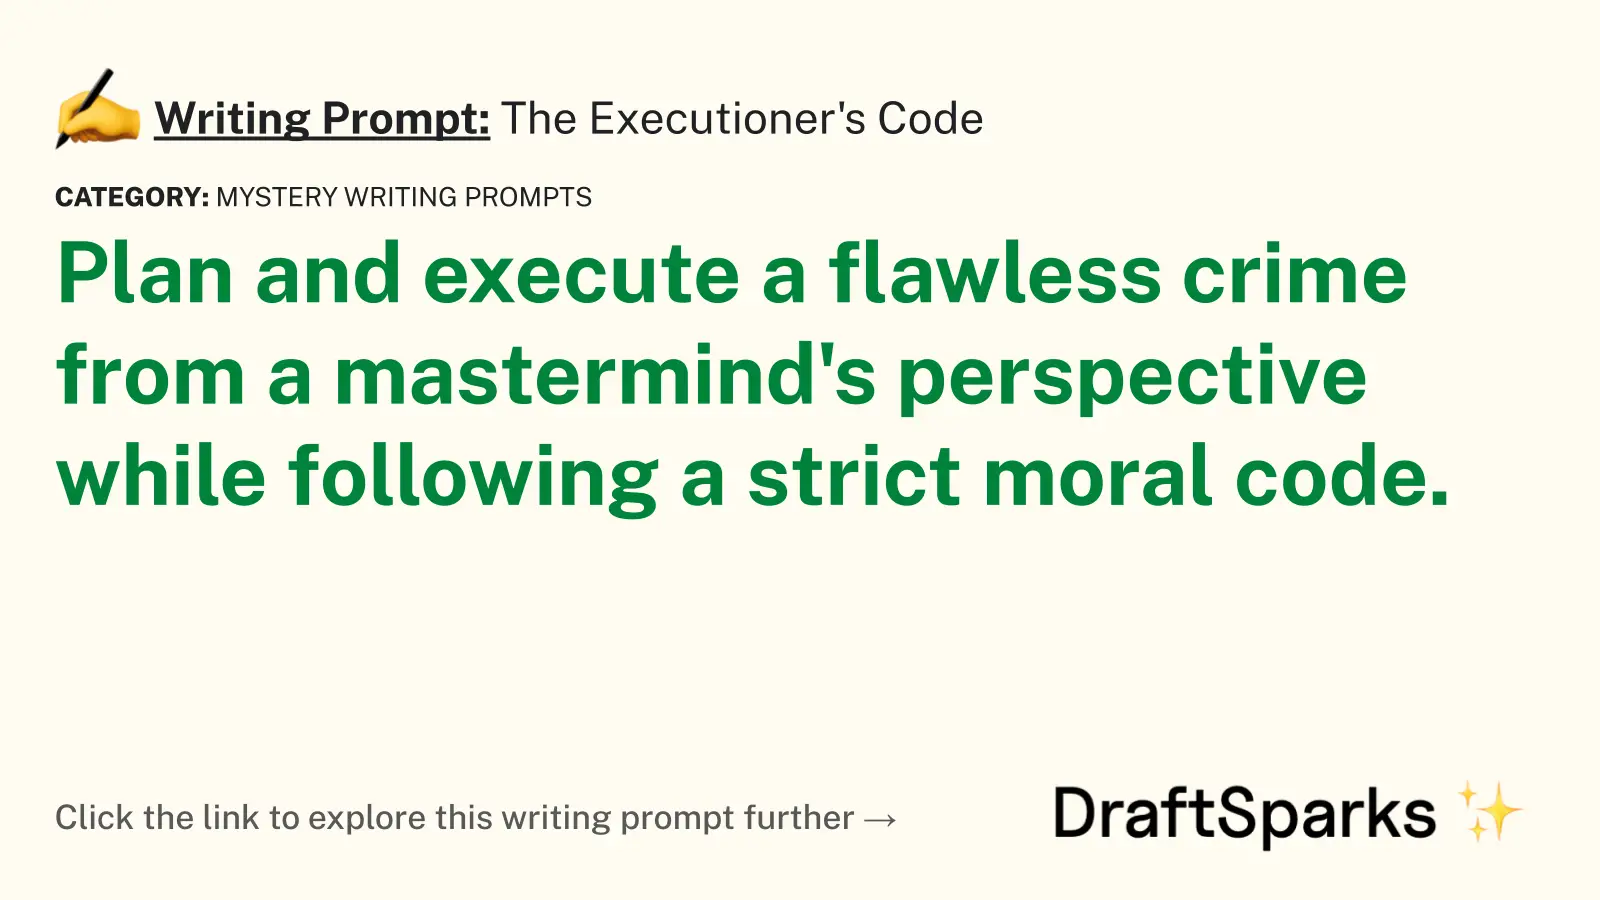 The Executioner’s Code